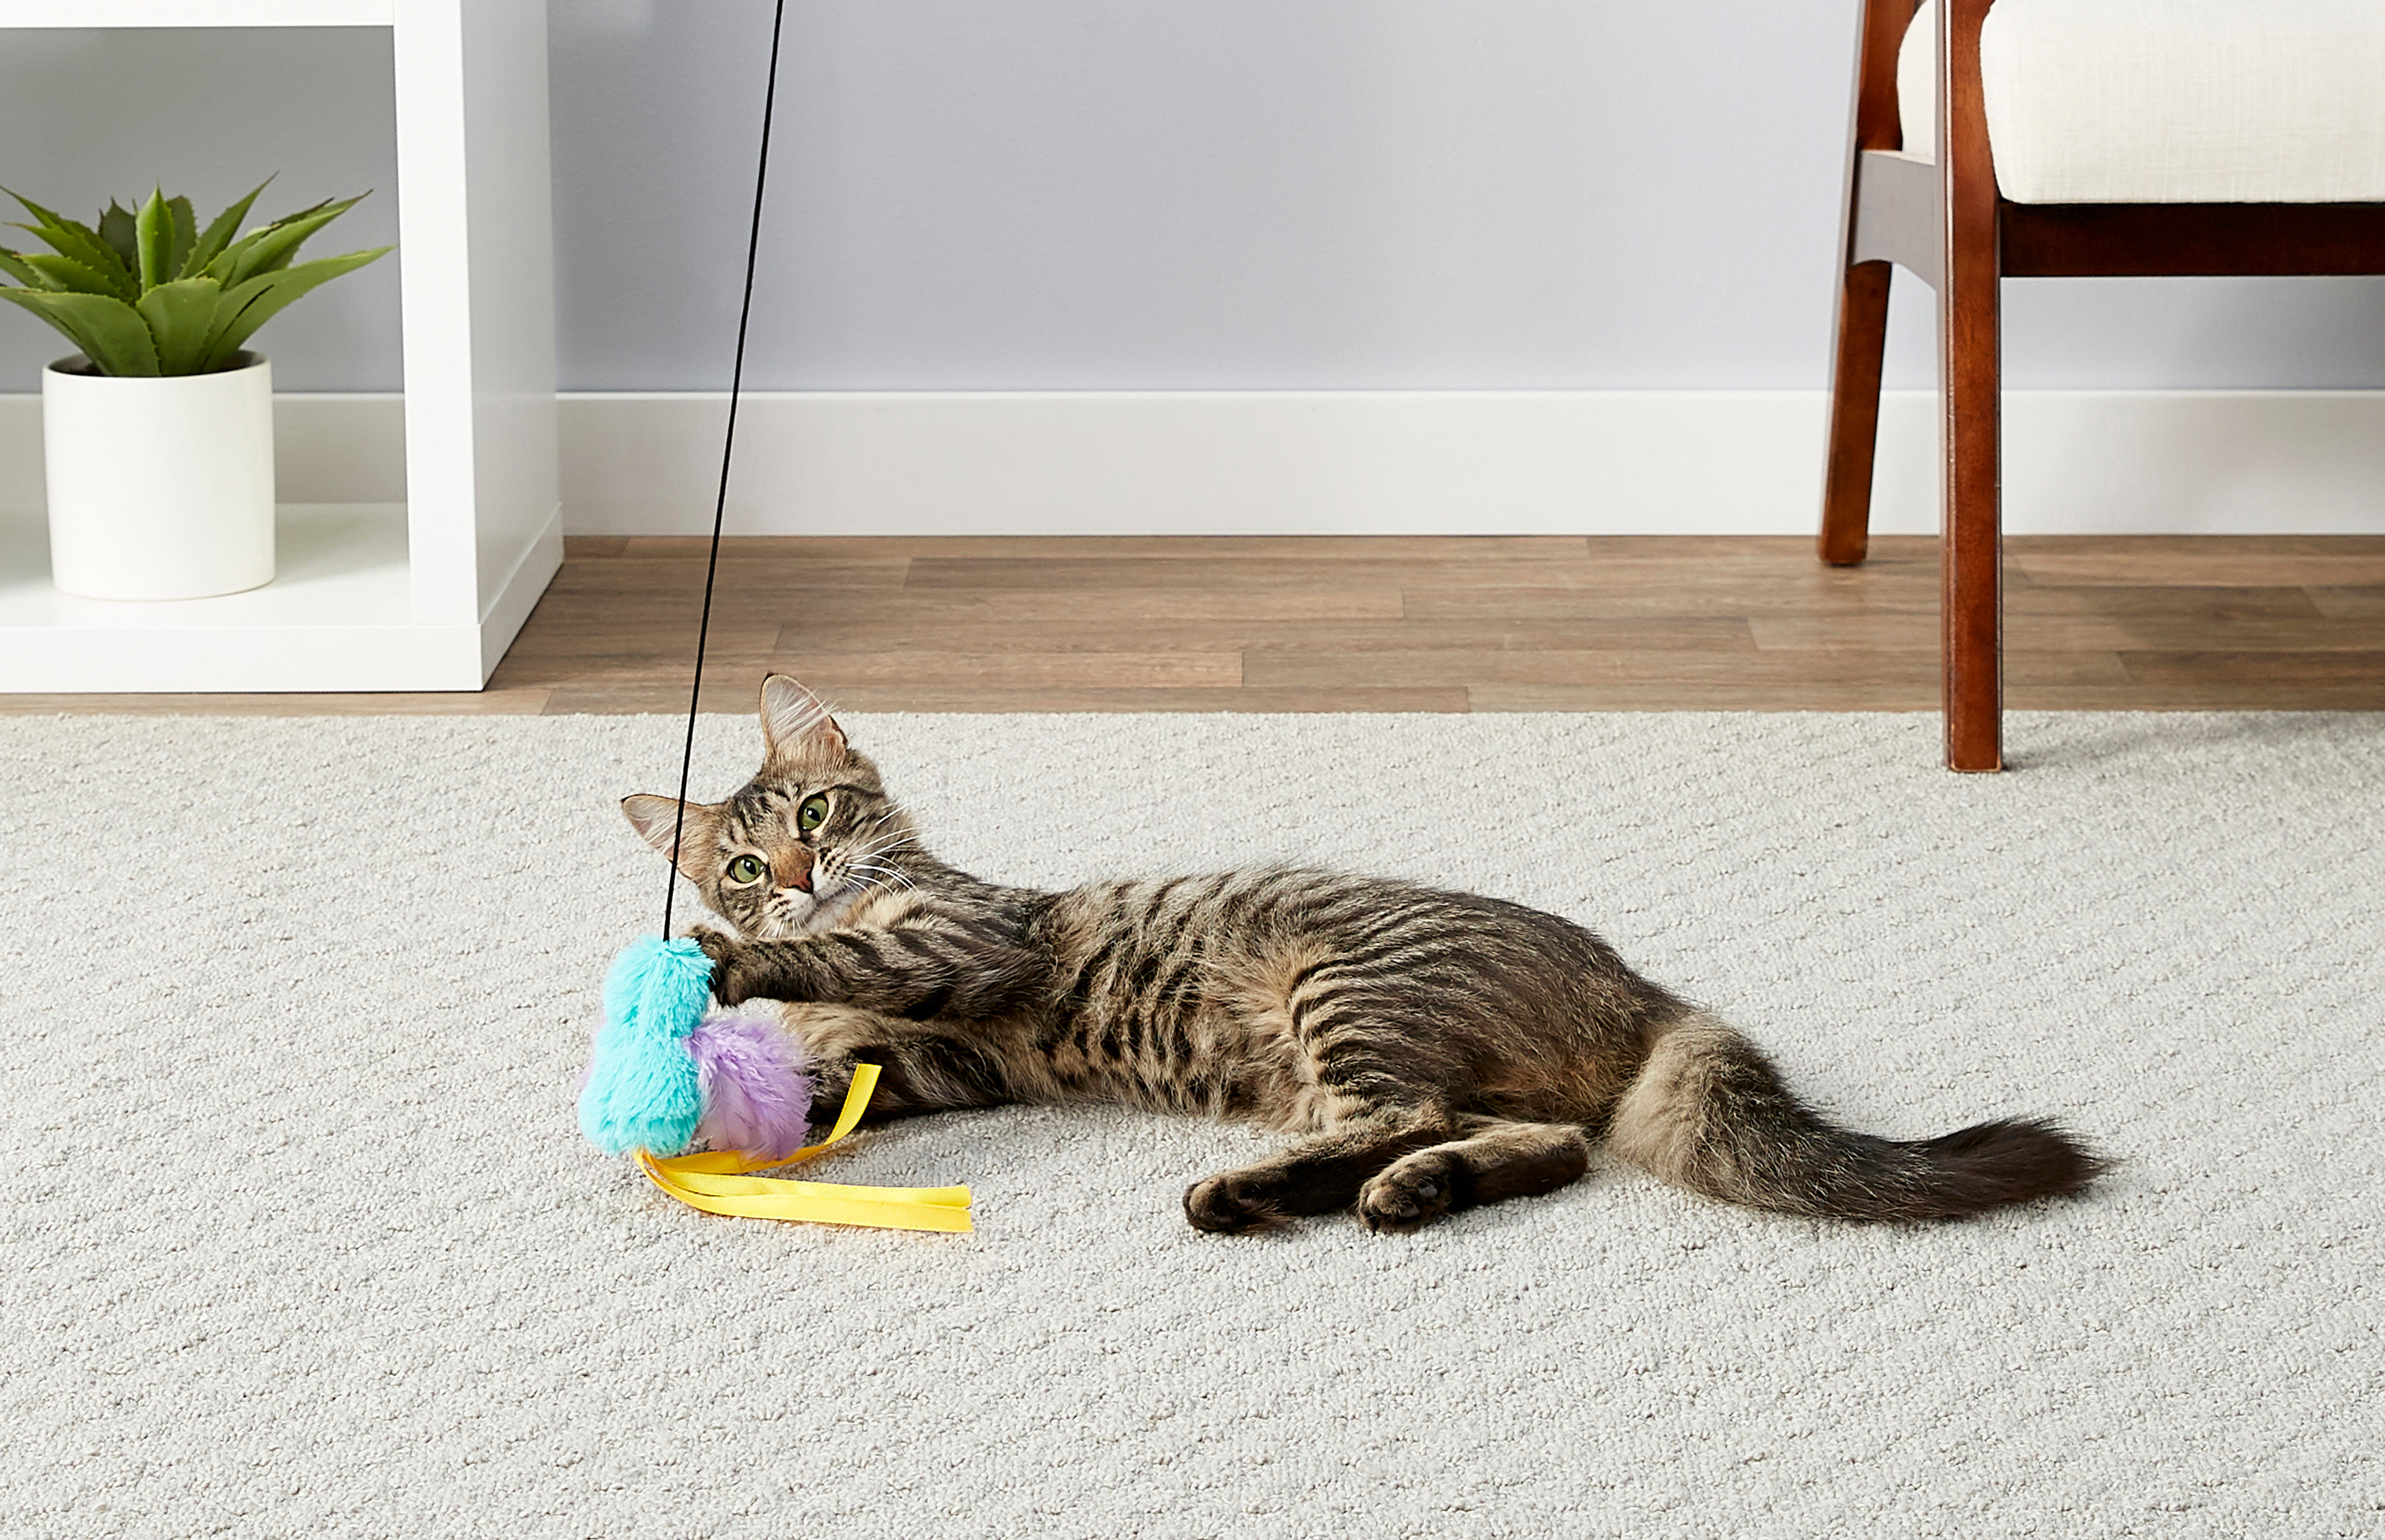 A cat lays on the rug playing with its toy